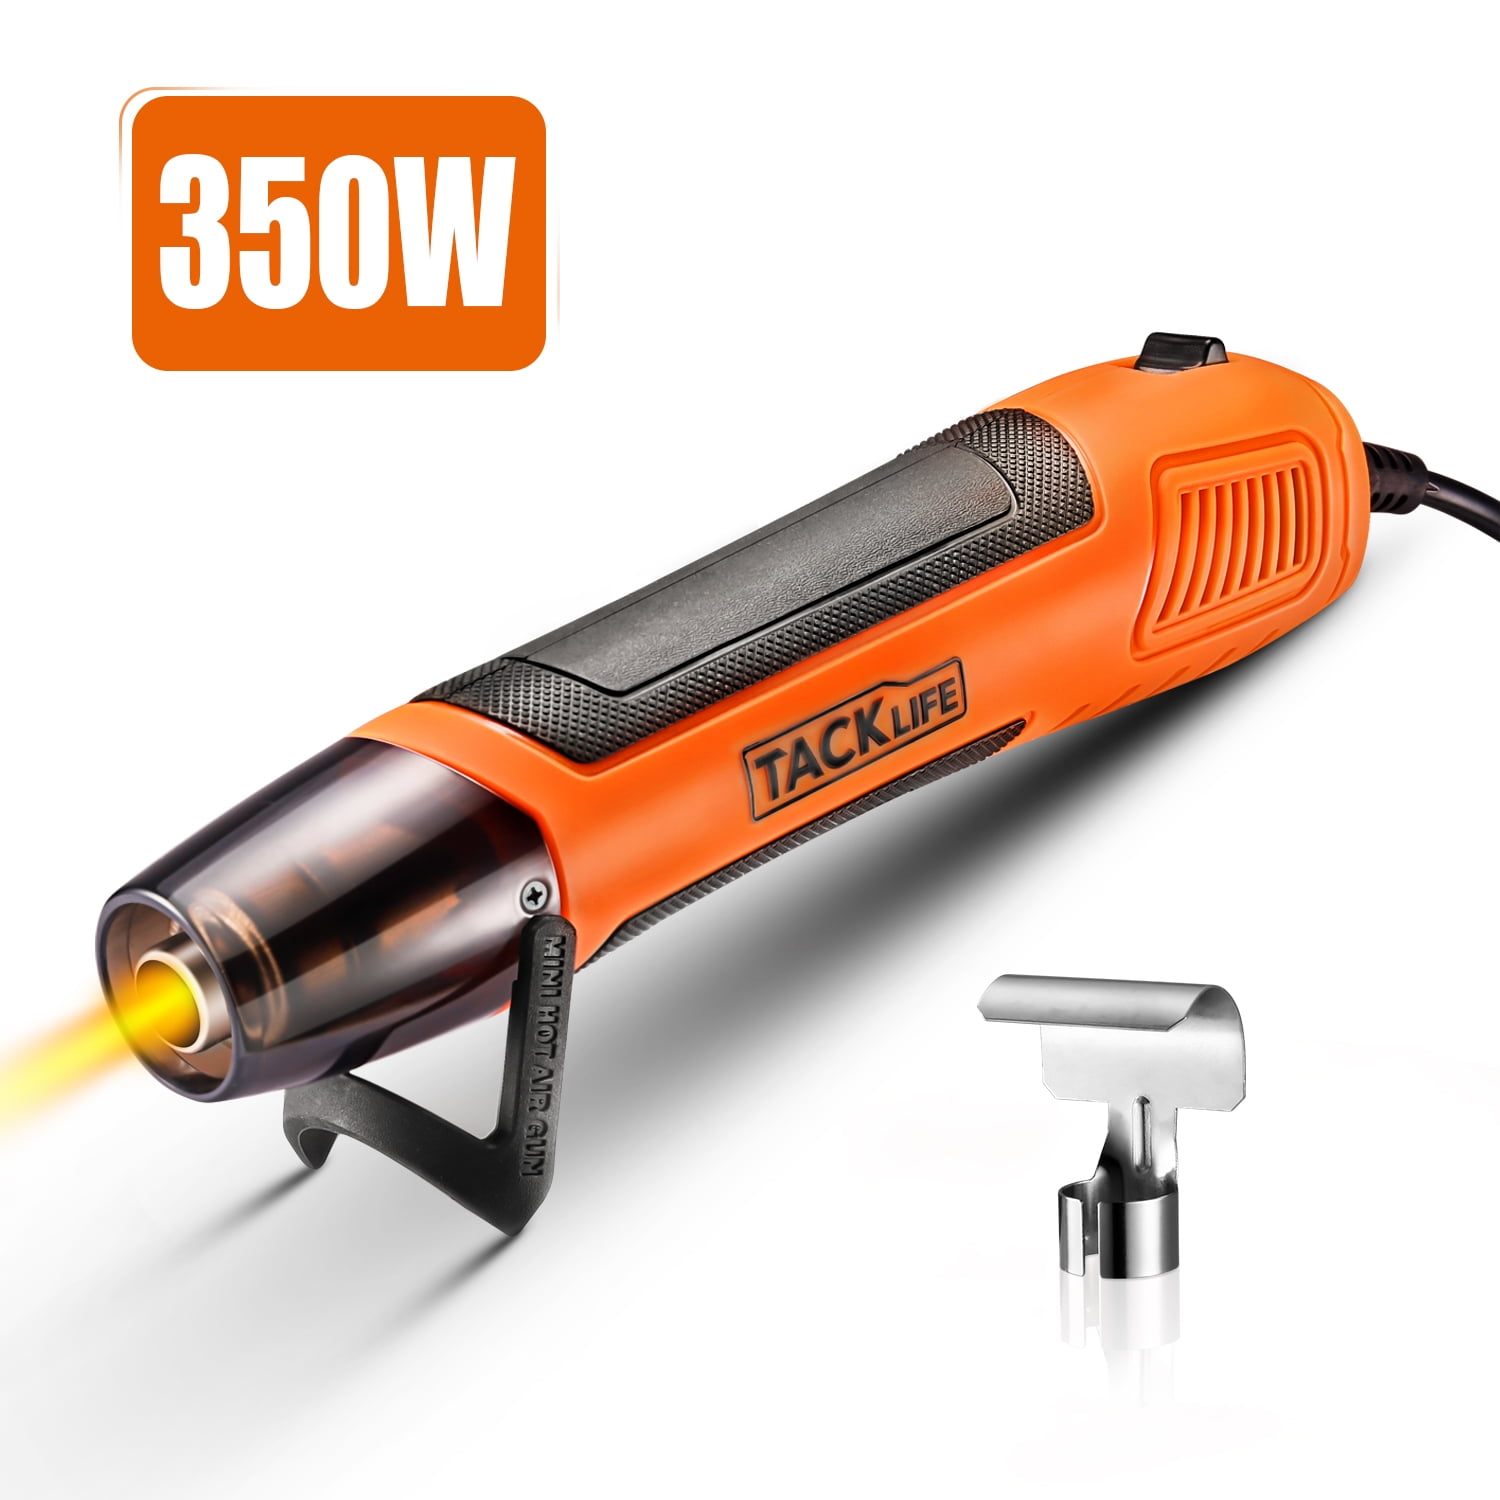 Arts and Crafts Shrinking Films. Mini Heat Gun 300w @ 350C Great For Embossing 